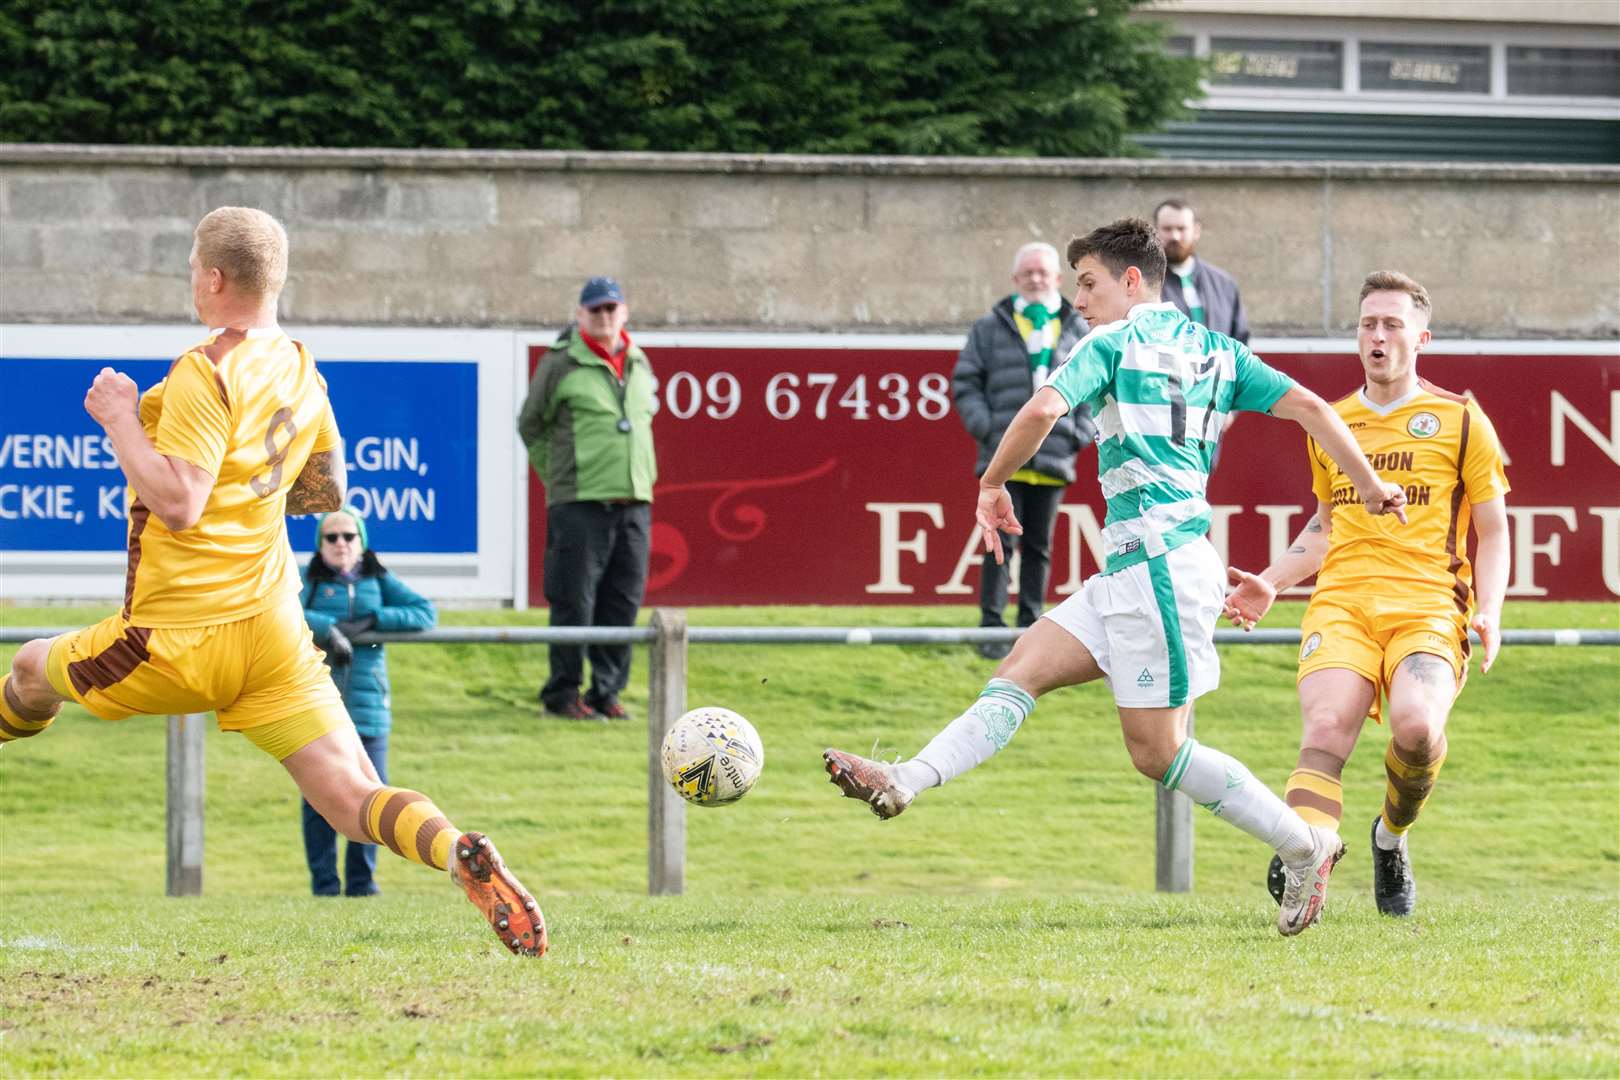 Buckie Thistle's Max Barry scores the Jags third goal of the afternoon. ..Forres Mechanics FC (2) vs Buckie Thistle FC (3) - Highland Football League 22/23 - Mosset Park, Forres 01/04/23...Picture: Daniel Forsyth..